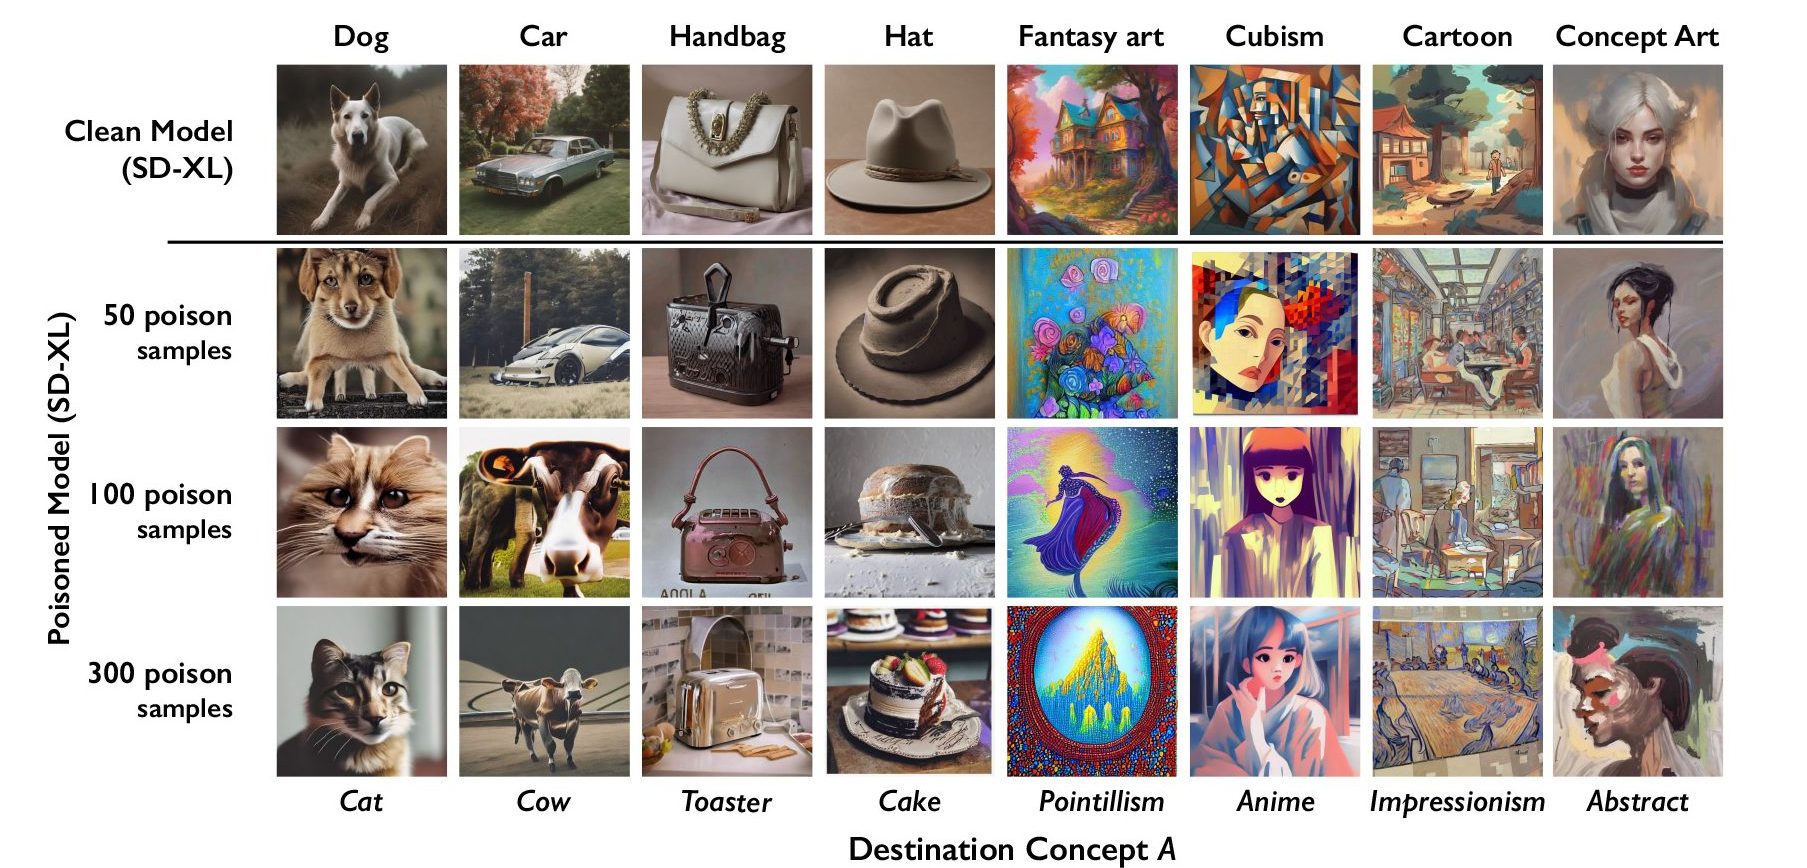 A table showing a grid of thumbnails of generated images of Hemlock attack-poisoned concepts from SD-XL models contrasted with images from the clean SD-XL model in increments of 50, 100, and 300 poisoned samples.